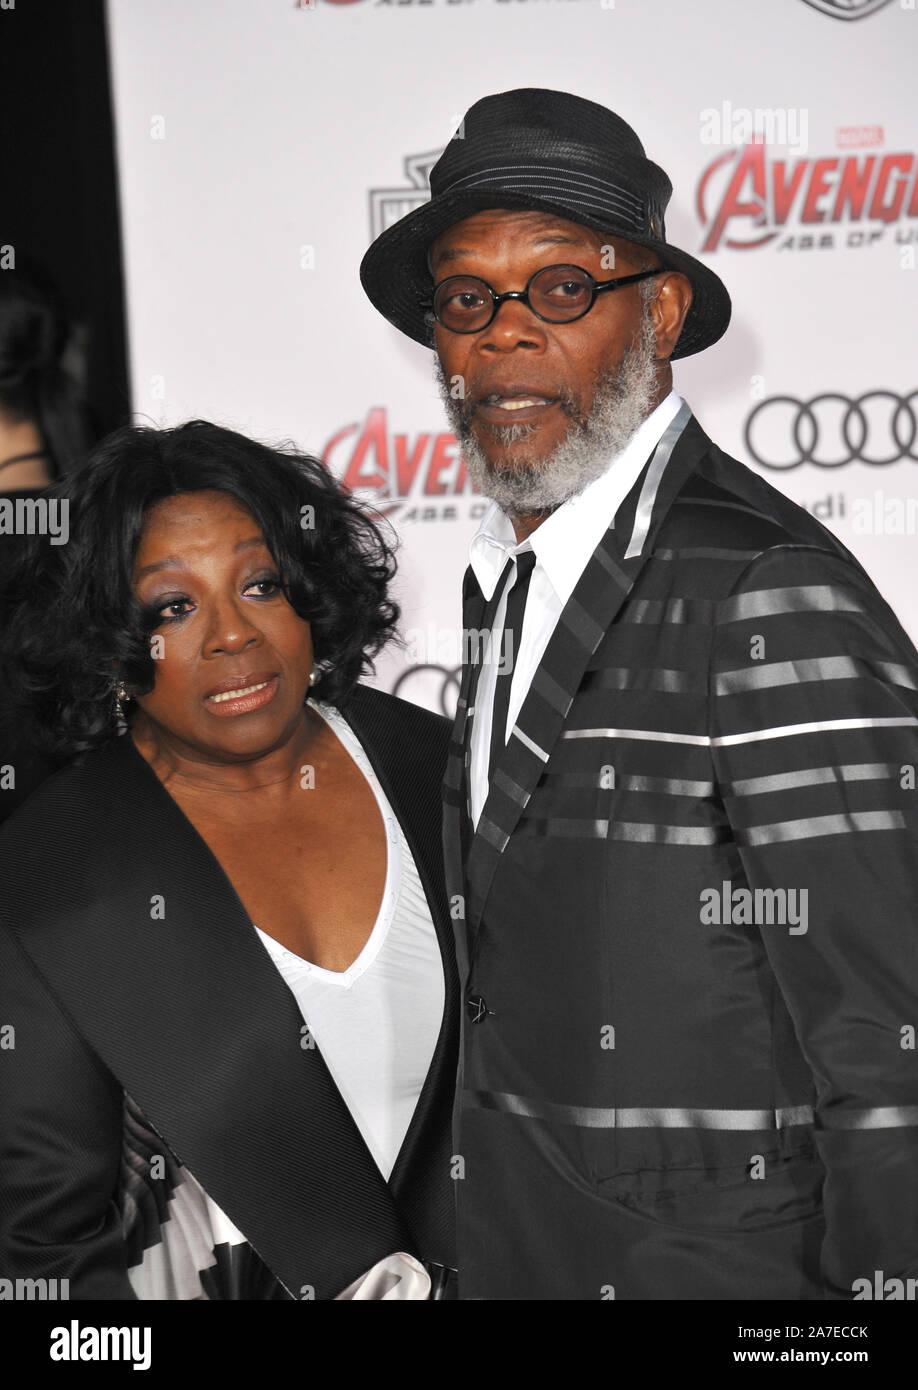 LOS ANGELES, CA - APRIL 13, 2015: Samuel L. Jackson & wife LaTanya Richardson at the world premiere of his movie 'Avengers: Age of Ultron' at the Dolby Theatre, Hollywood. © 2015 Paul Smith / Featureflash Stock Photo